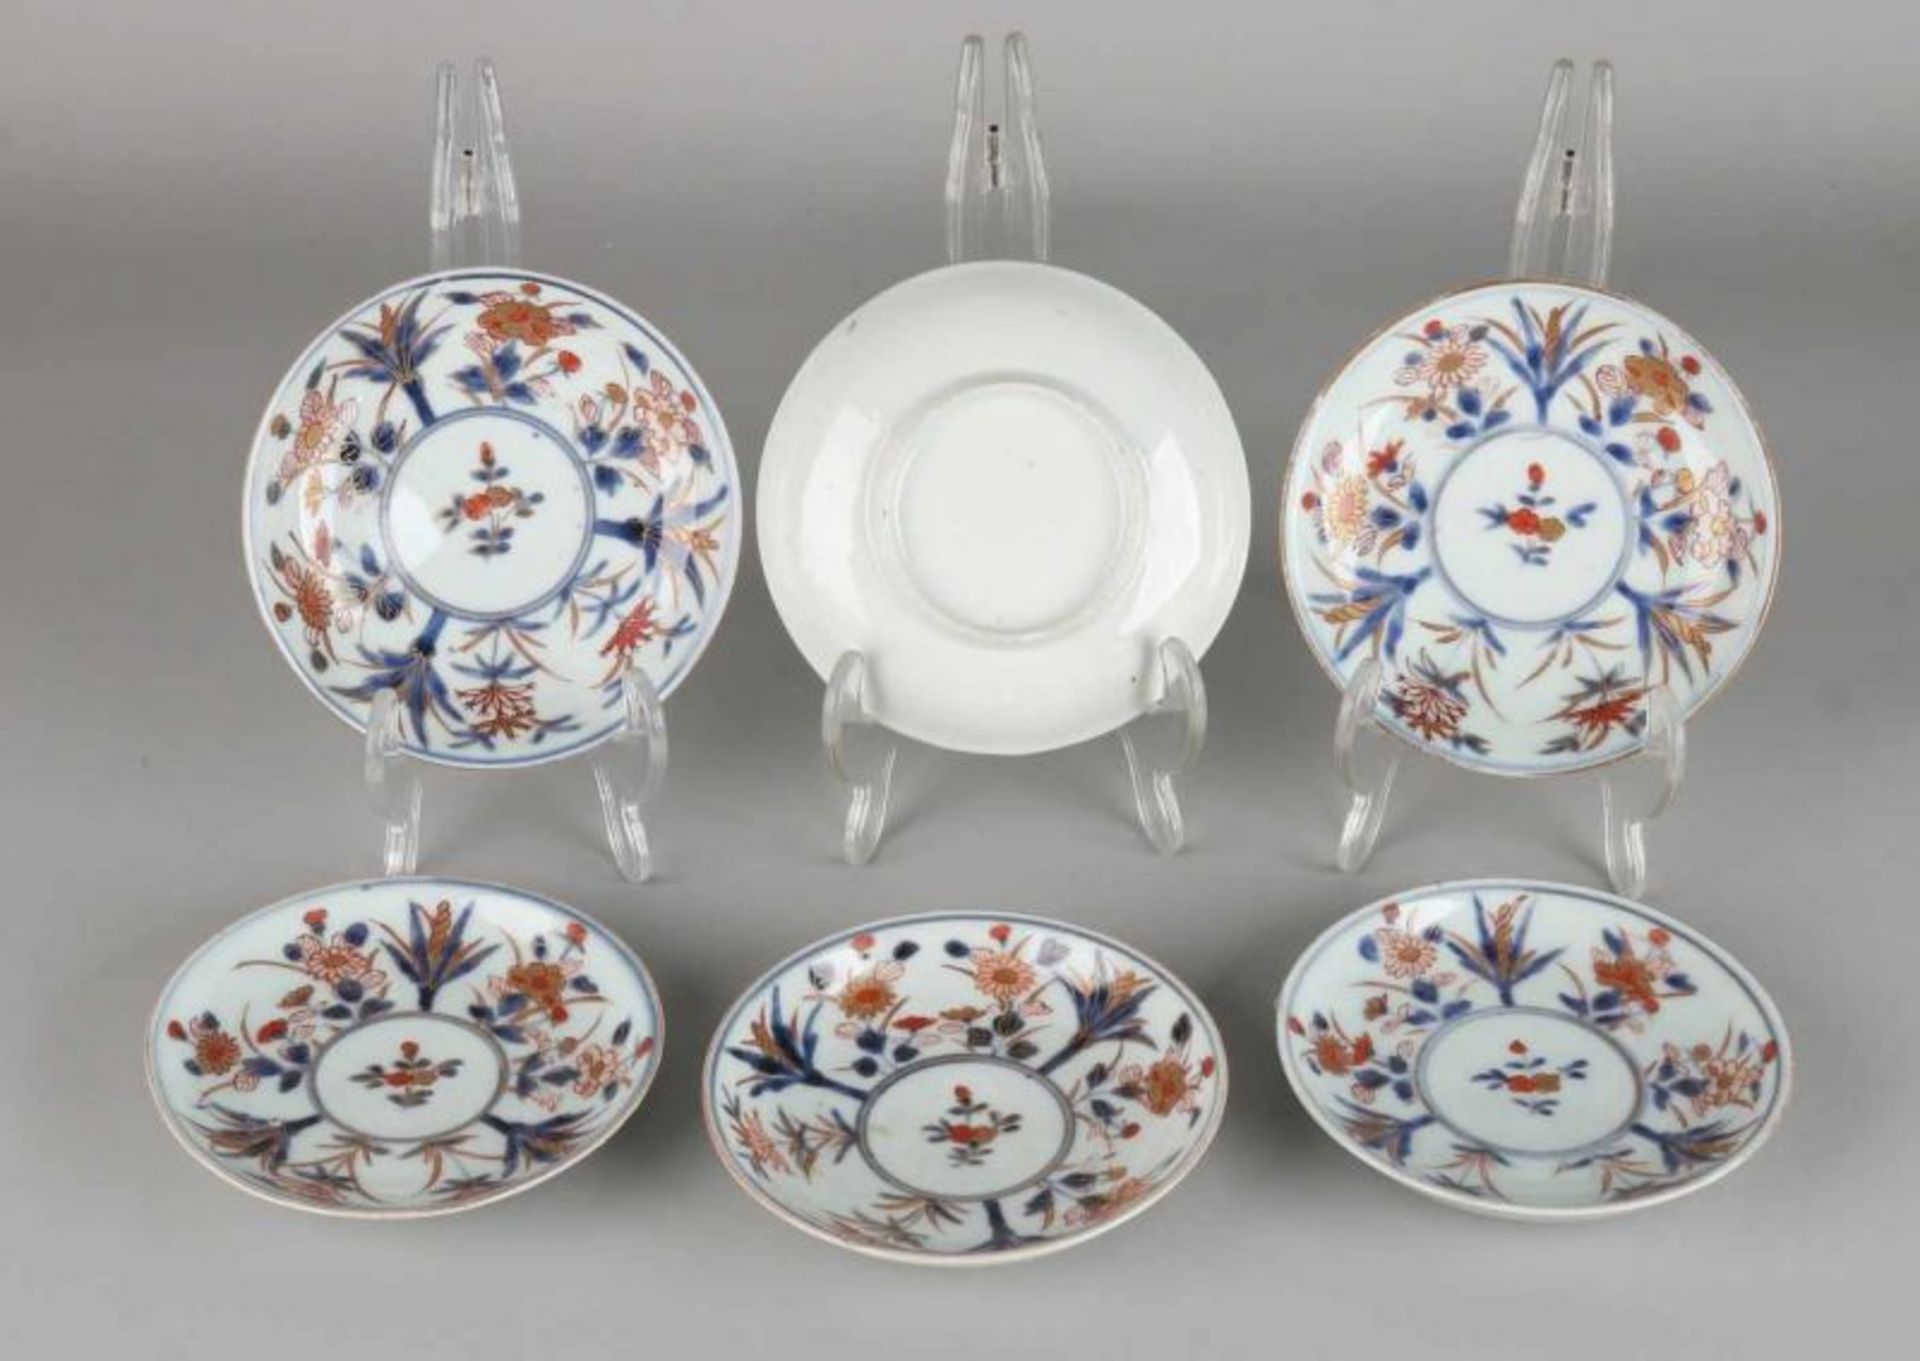 Six 18th century Chinese porcelain cups and saucers with floral decor. Four cups of good, two